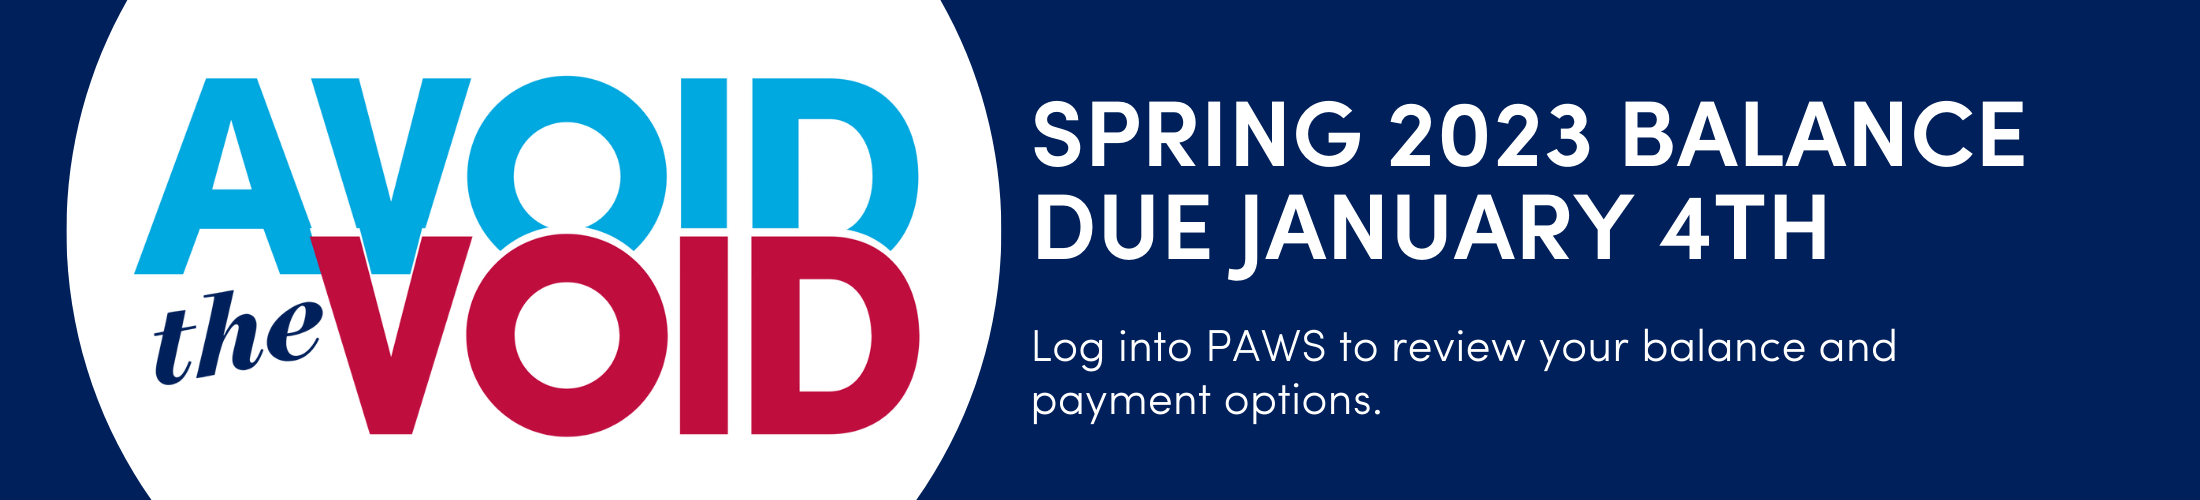 Avoid the Void Spring 2023 Balance Due January 4th Log into PAWS to review your balance and payment options.